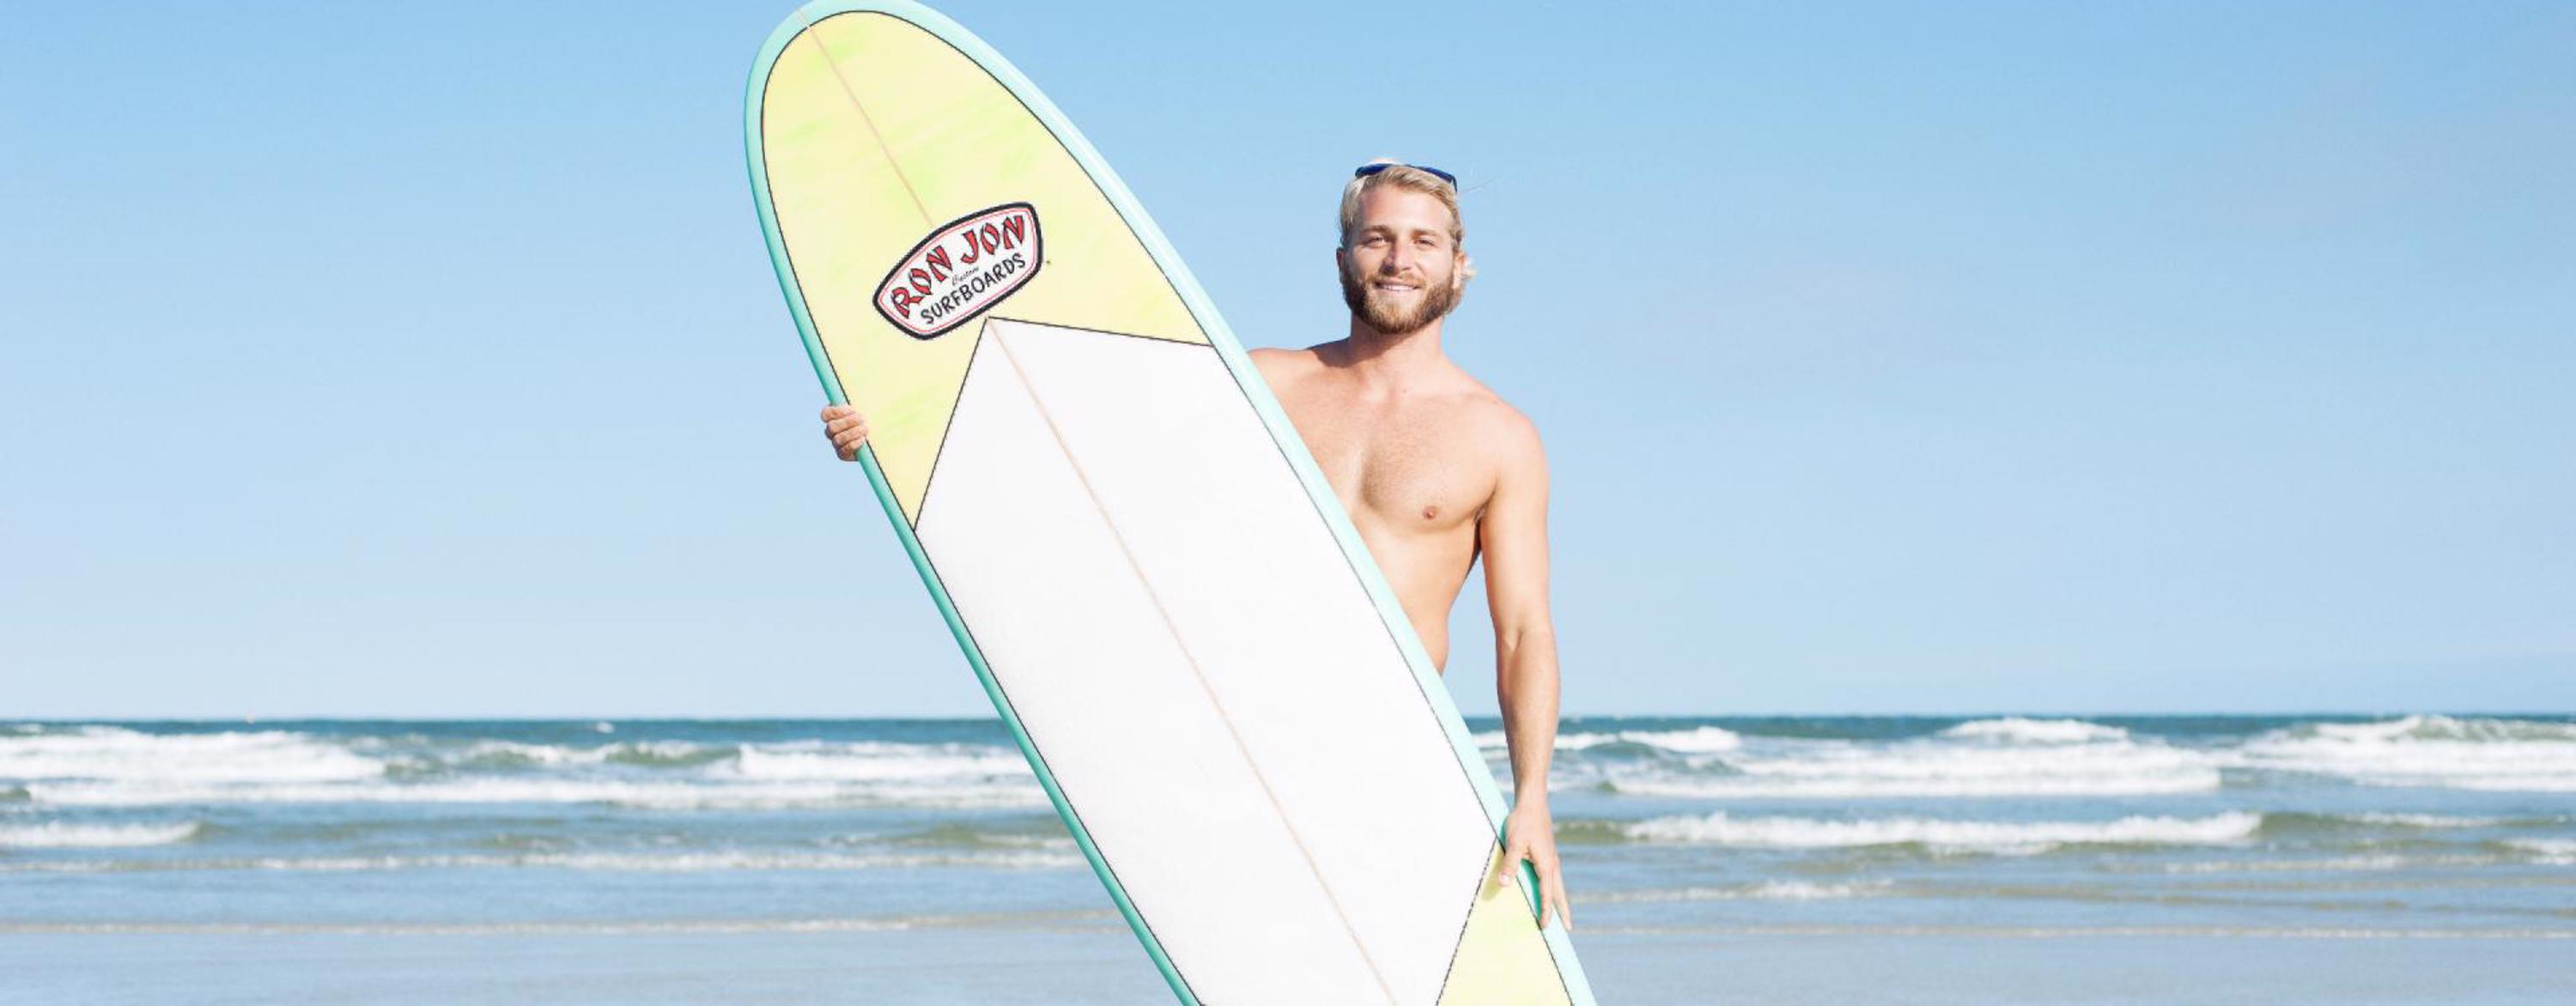 guy holding a surfboard